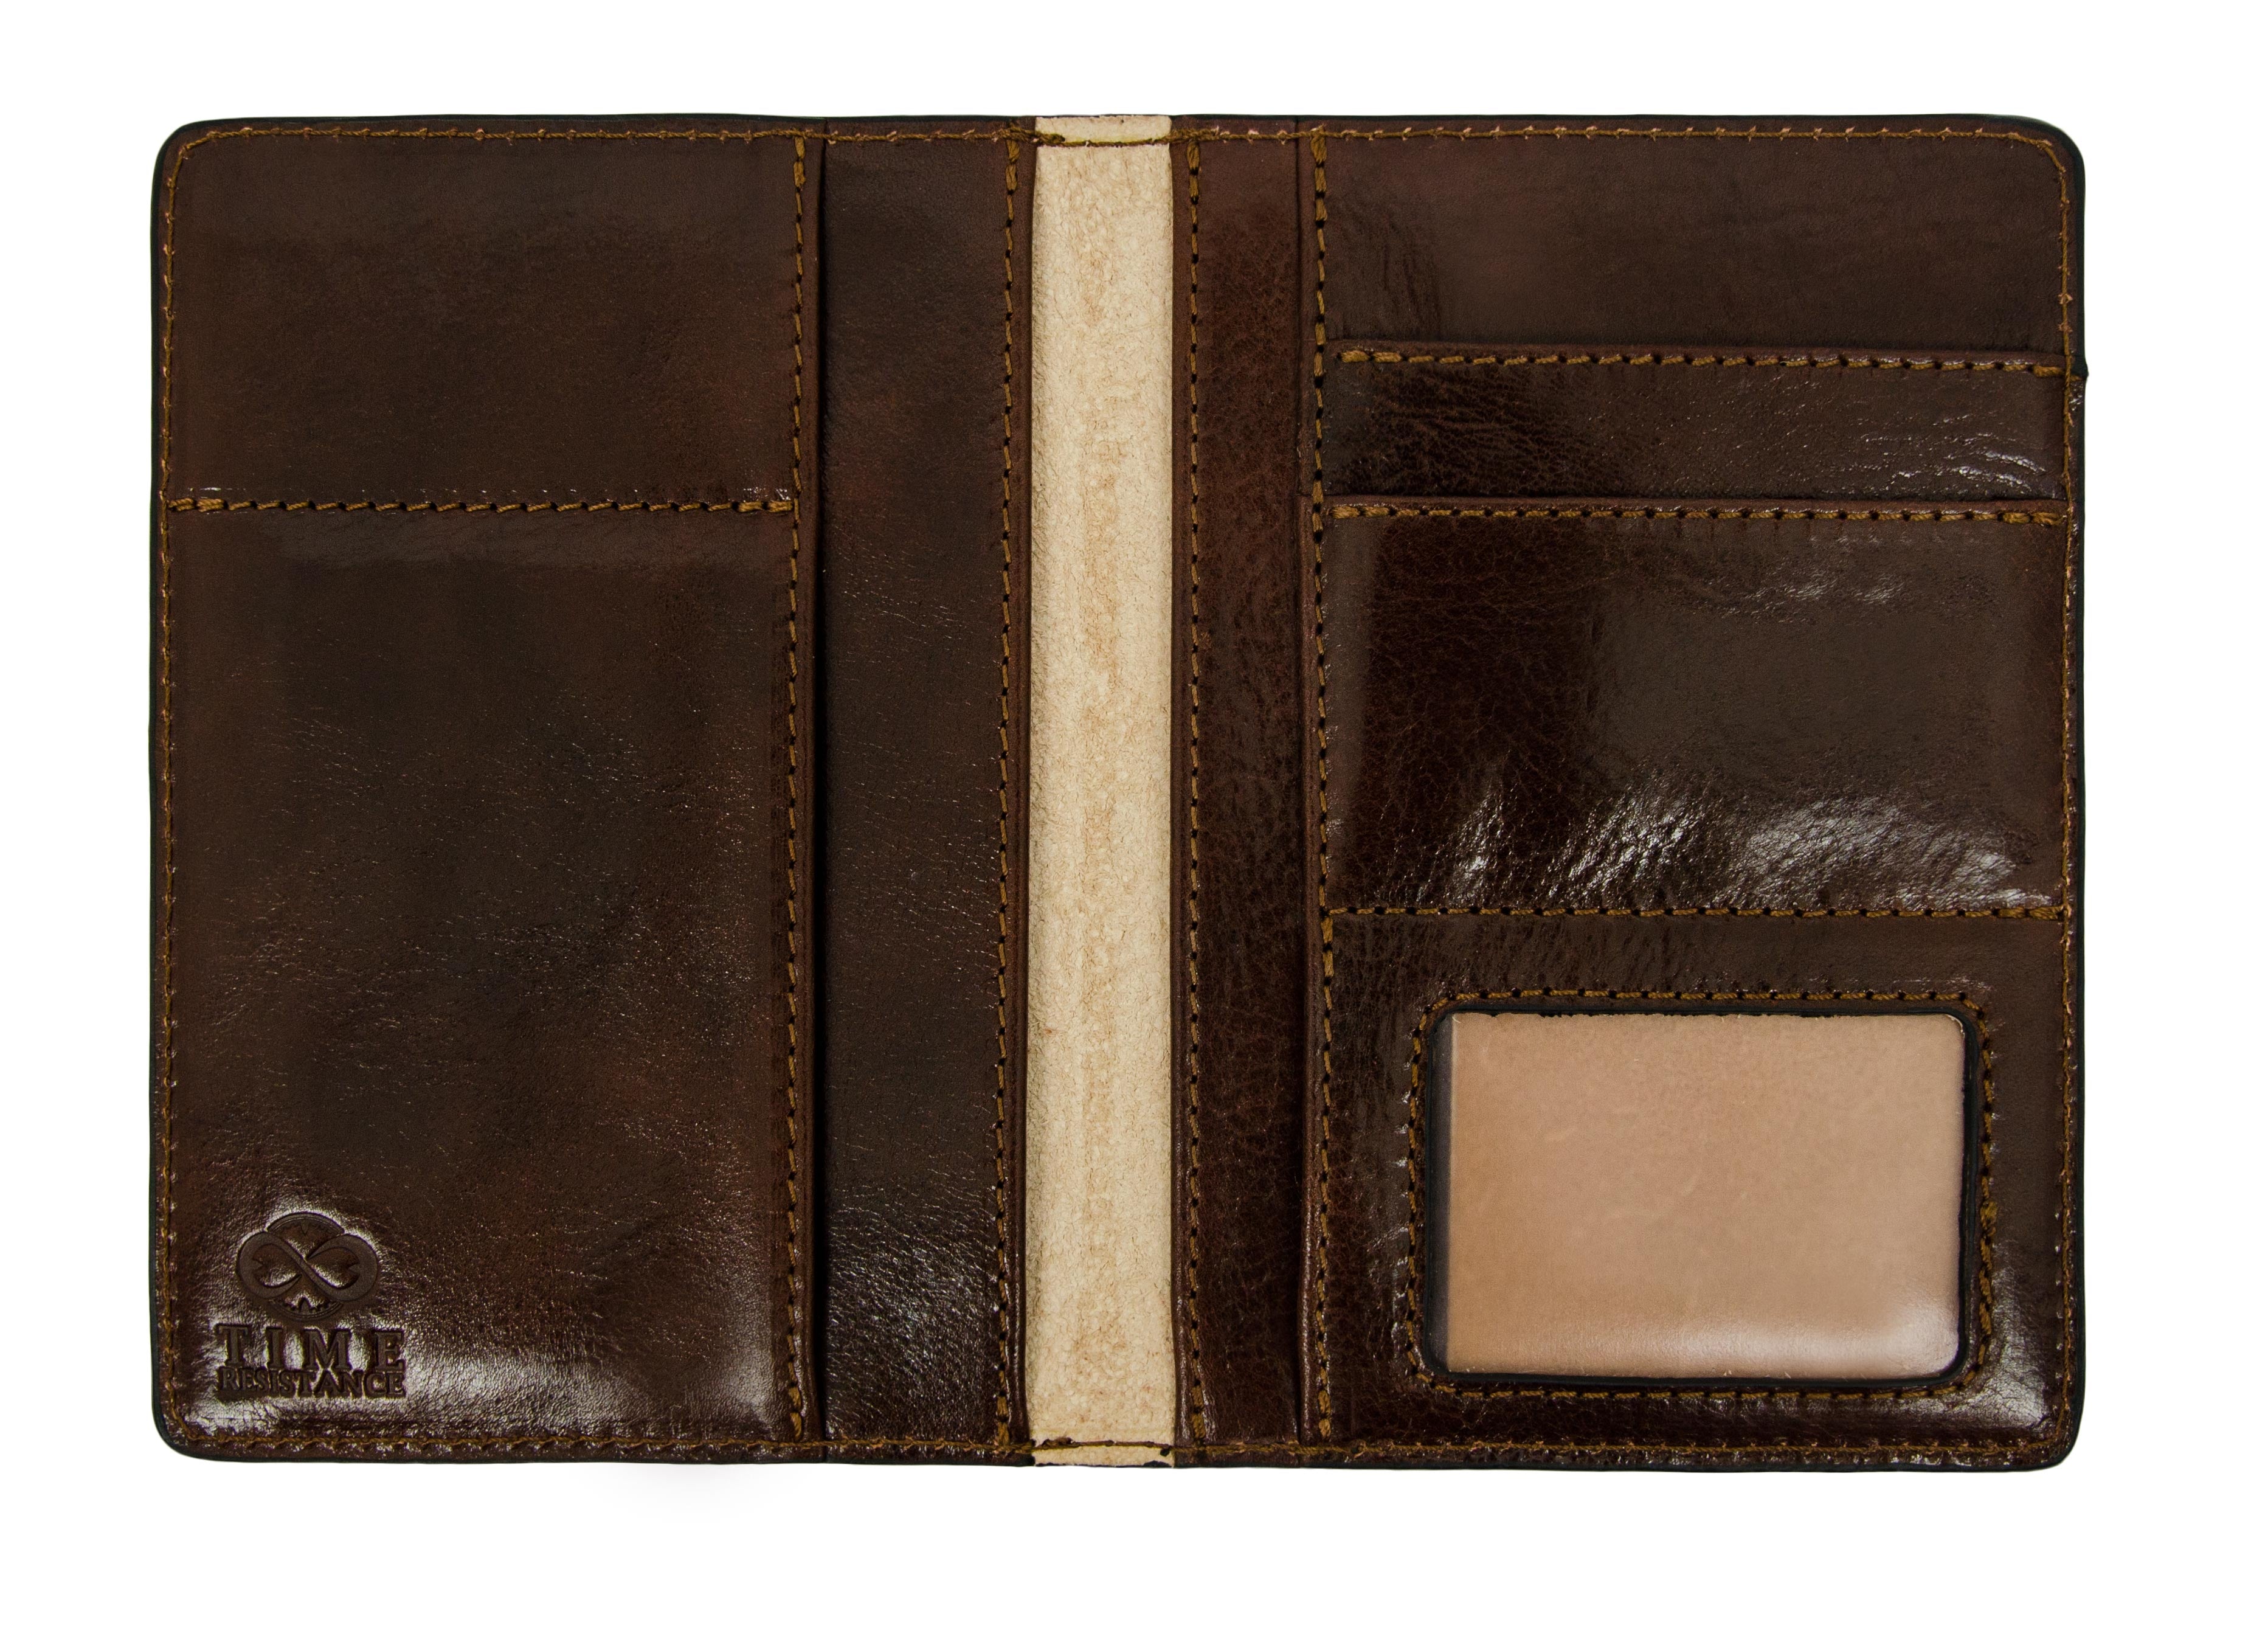 Brown Leather Car Documents Holder - Self-Reliance